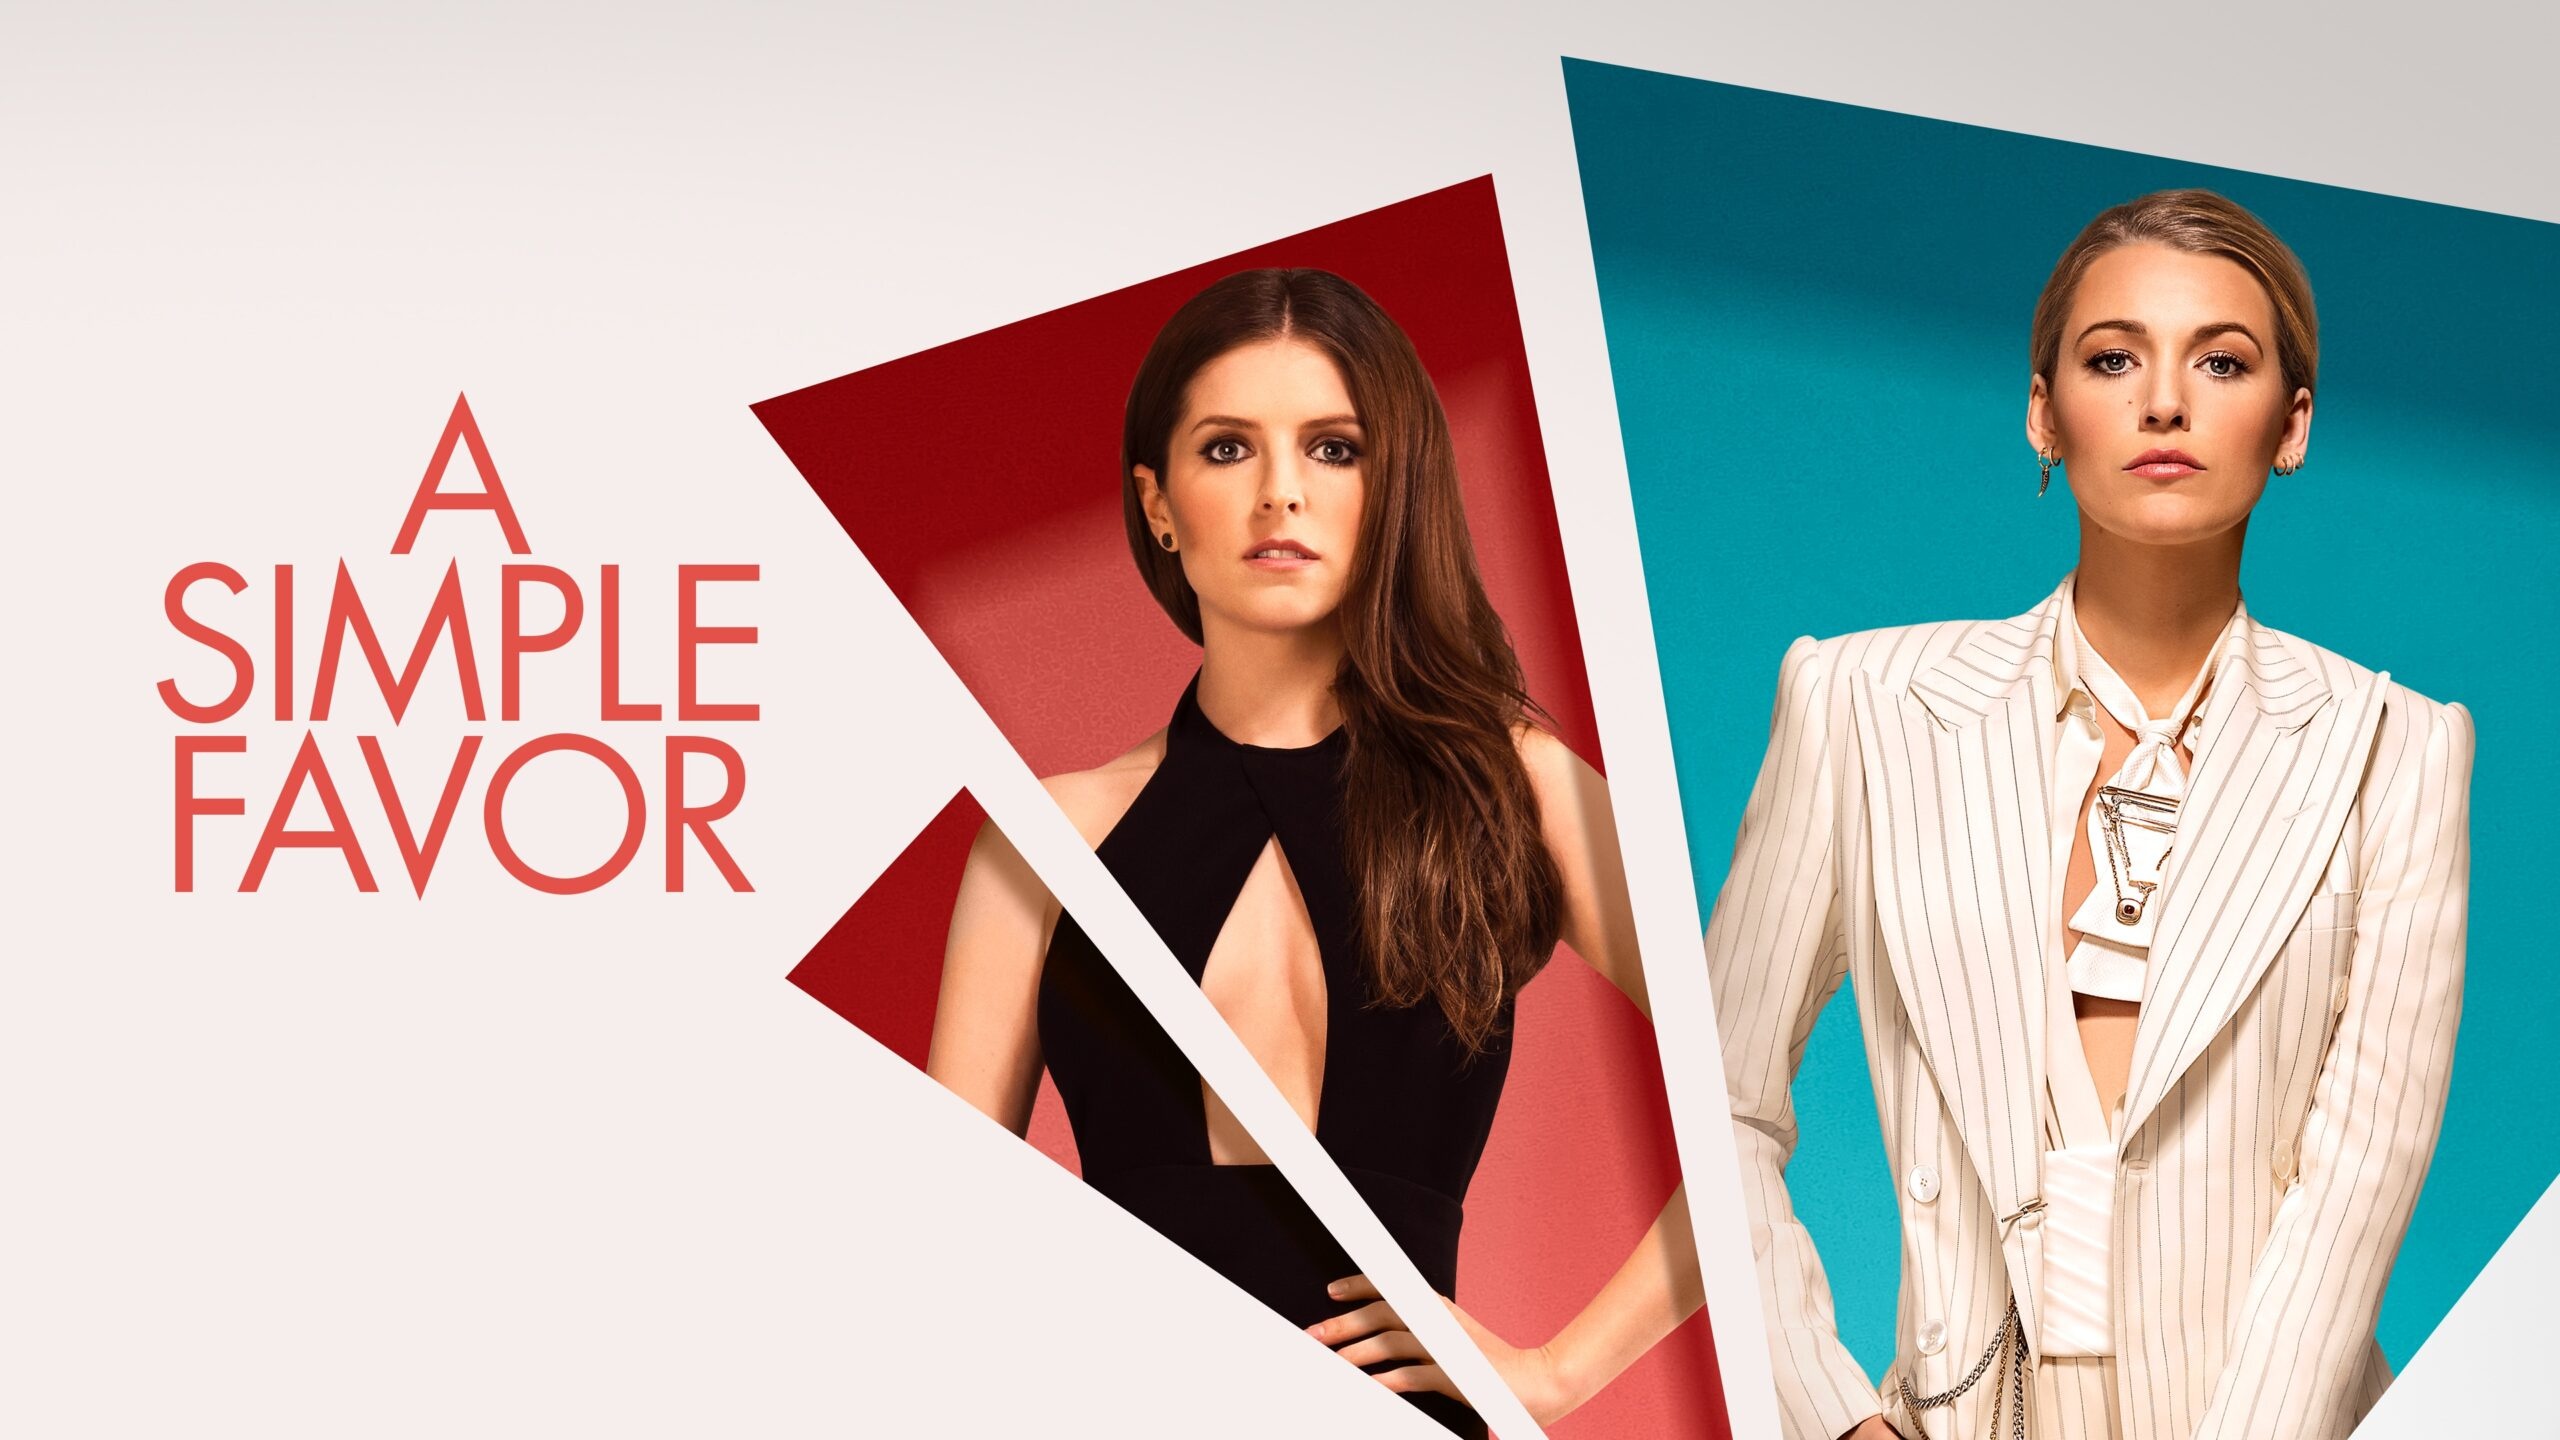 A Simple Favor, Jumpcut online review, Compelling thriller, Captivating mystery, 2560x1440 HD Desktop